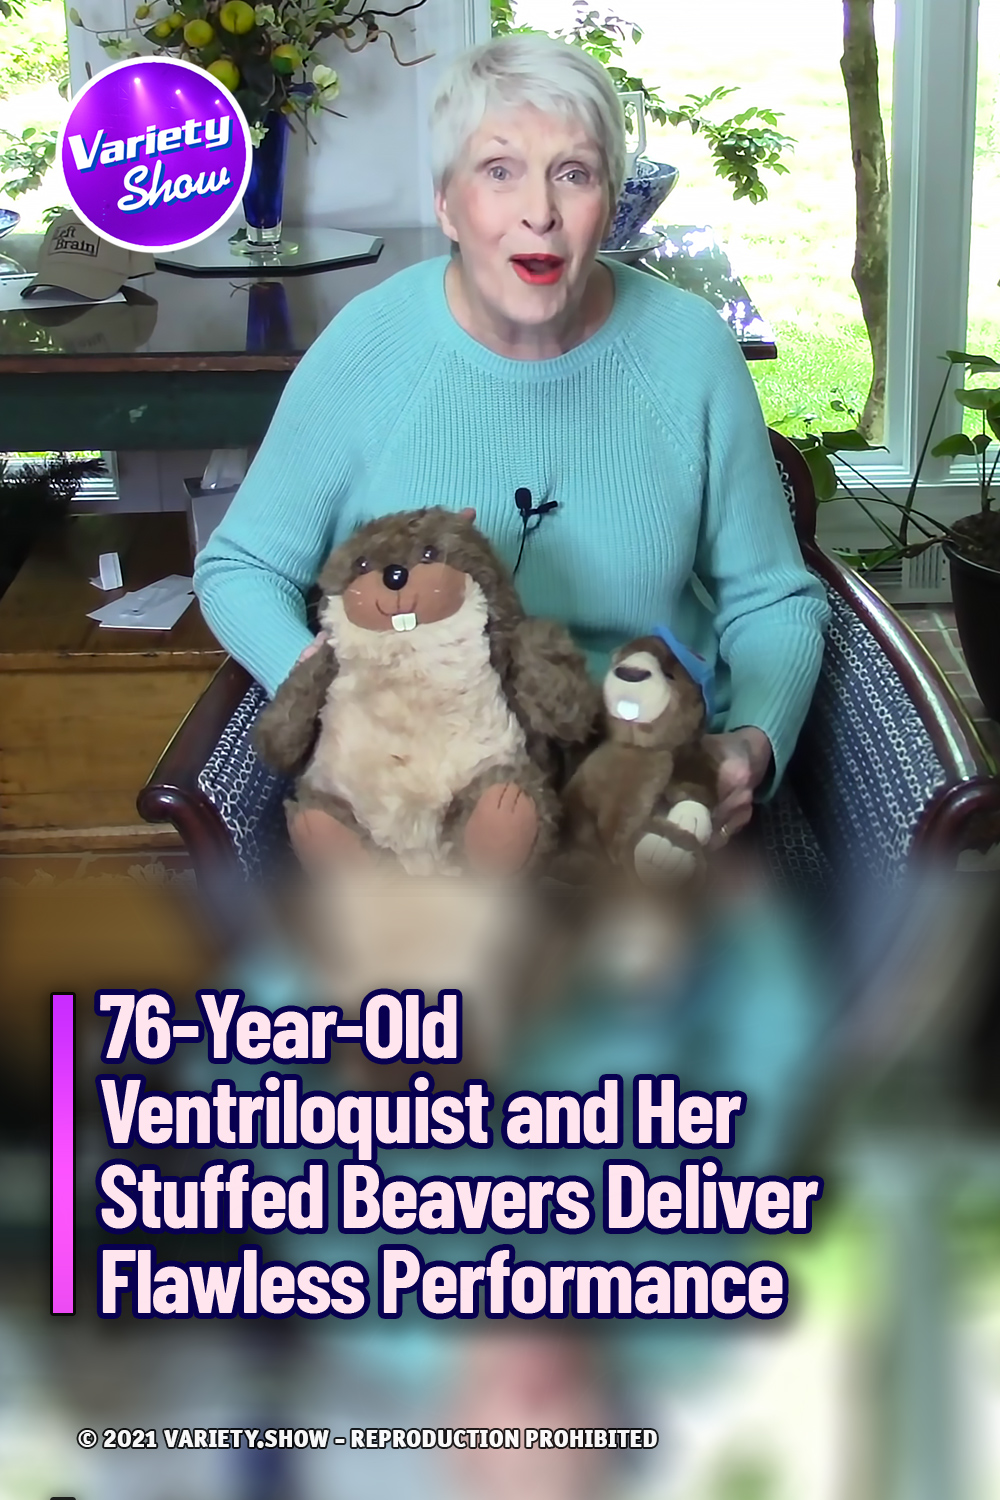 76-Year-Old Ventriloquist and Her Stuffed Beavers Deliver Flawless Performance